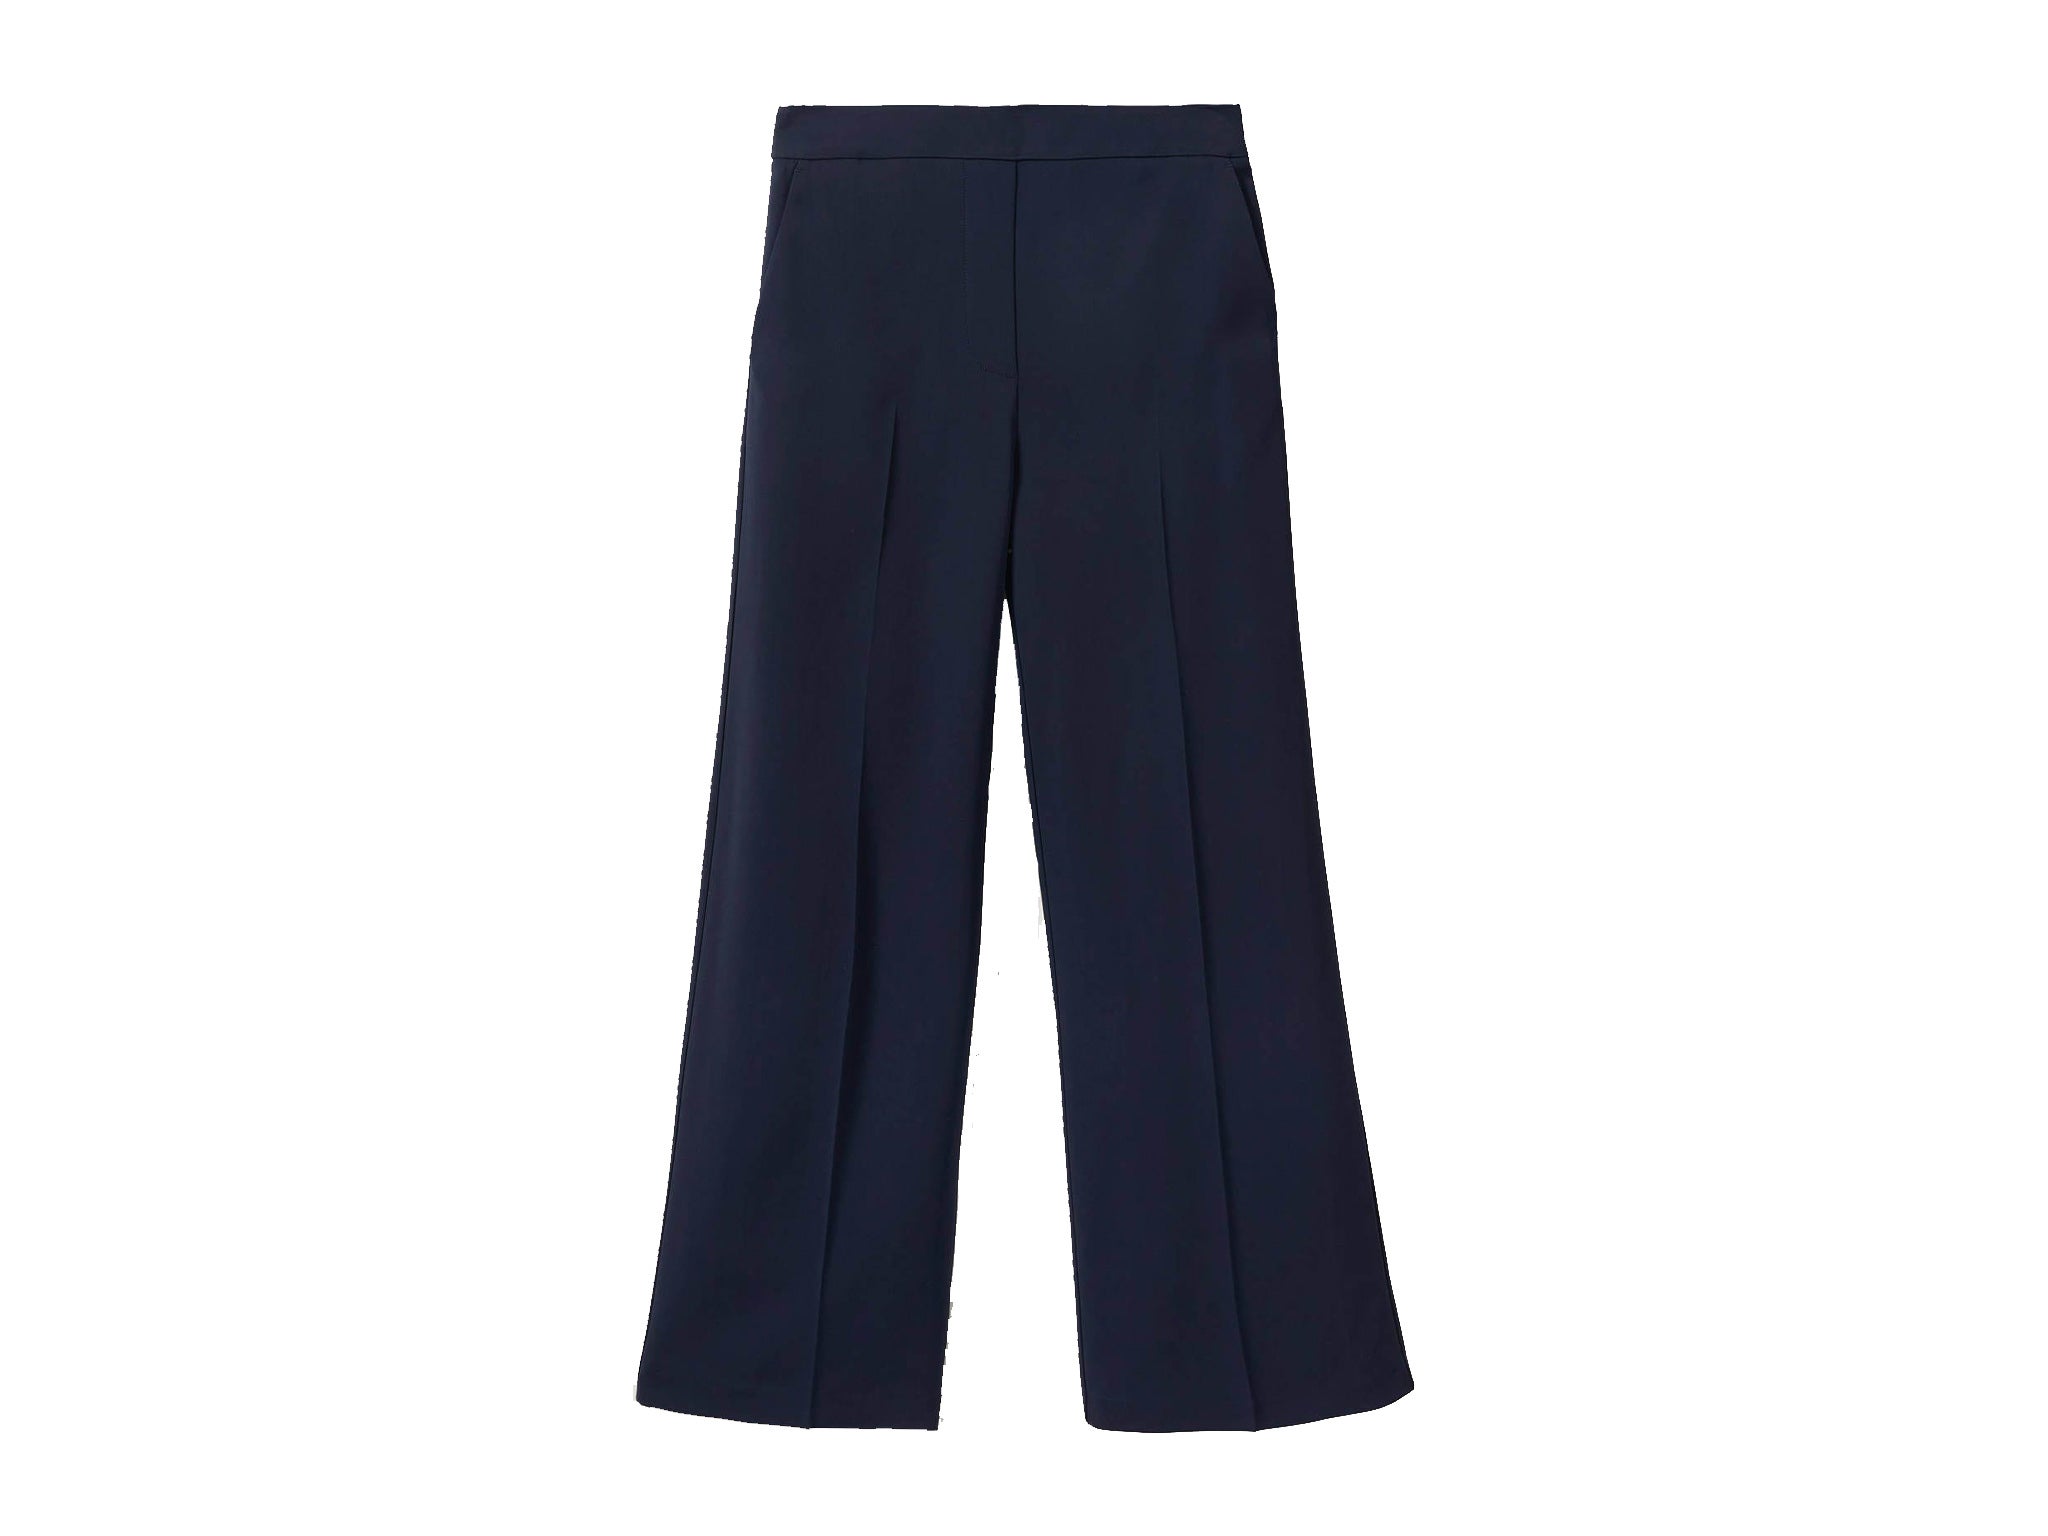 Boden%20Navy%20Trousers